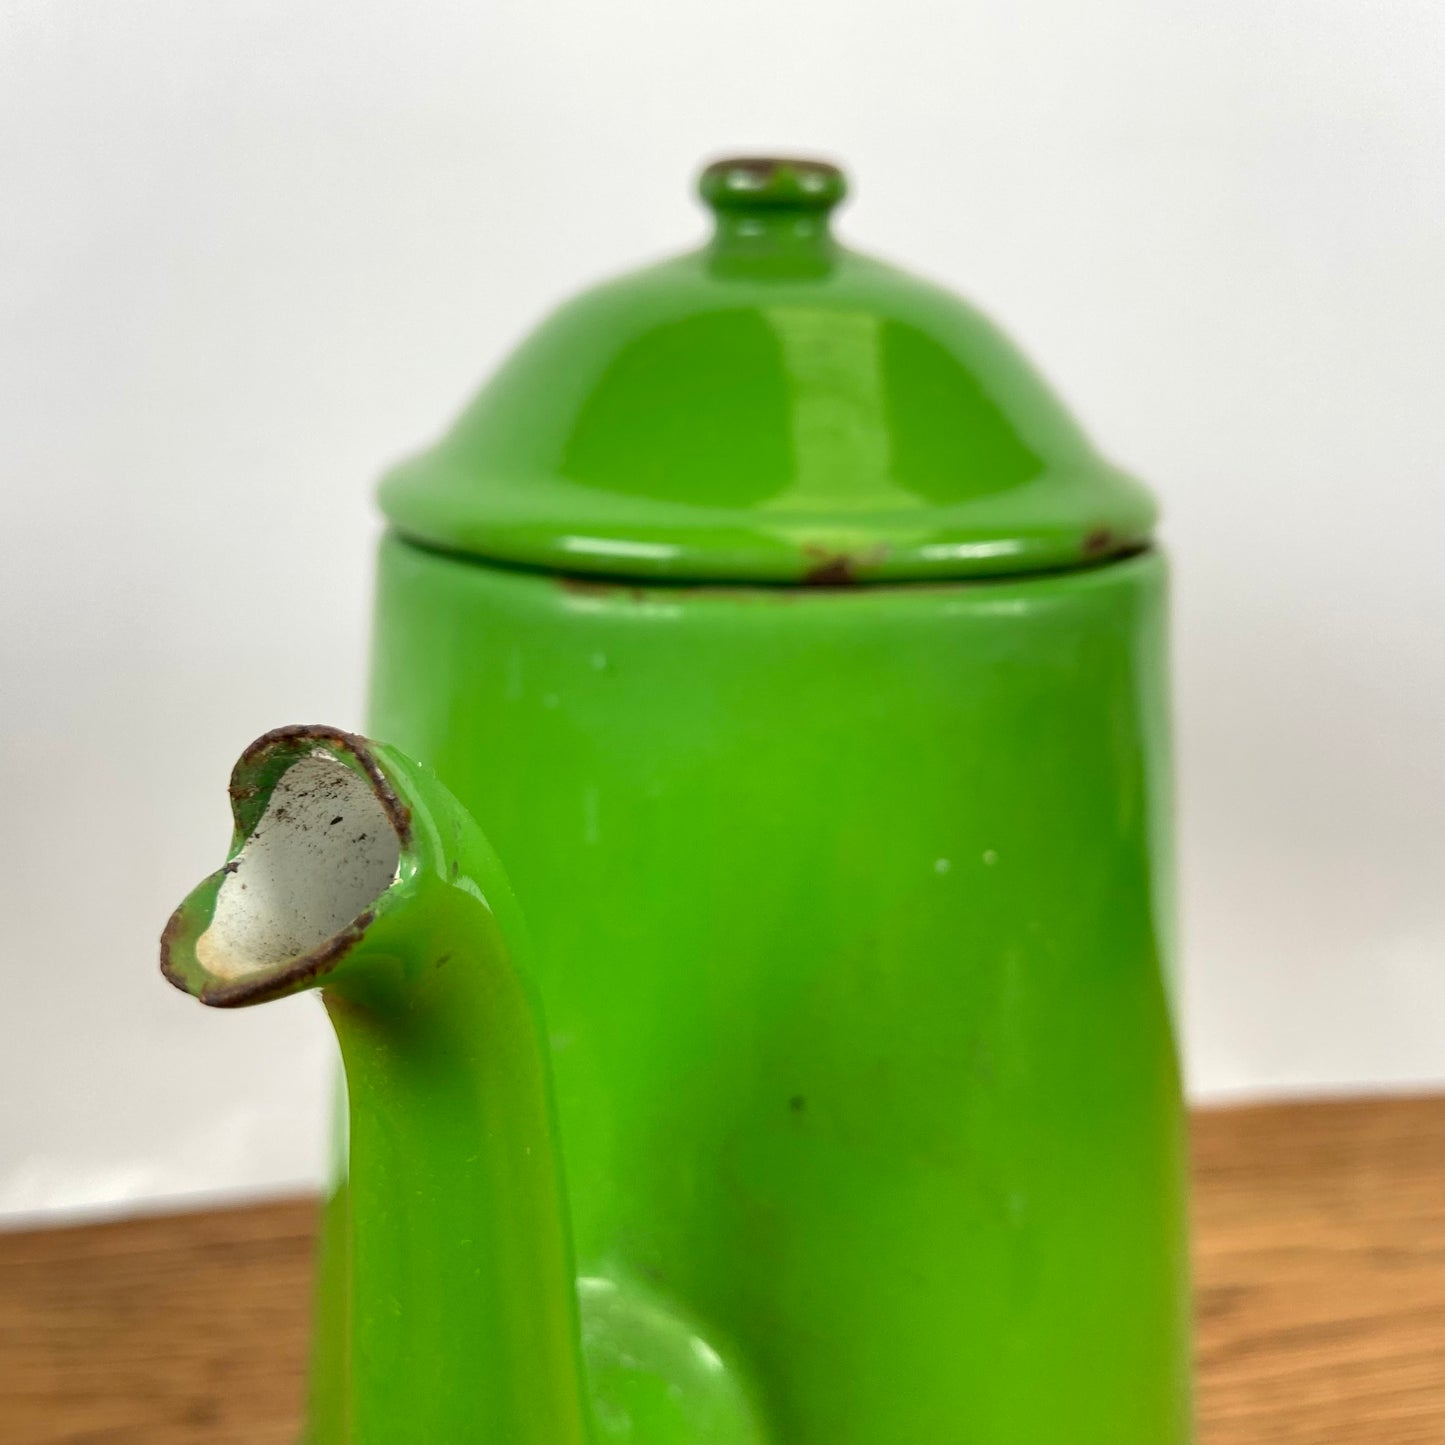 Vintage groene emaille theepot